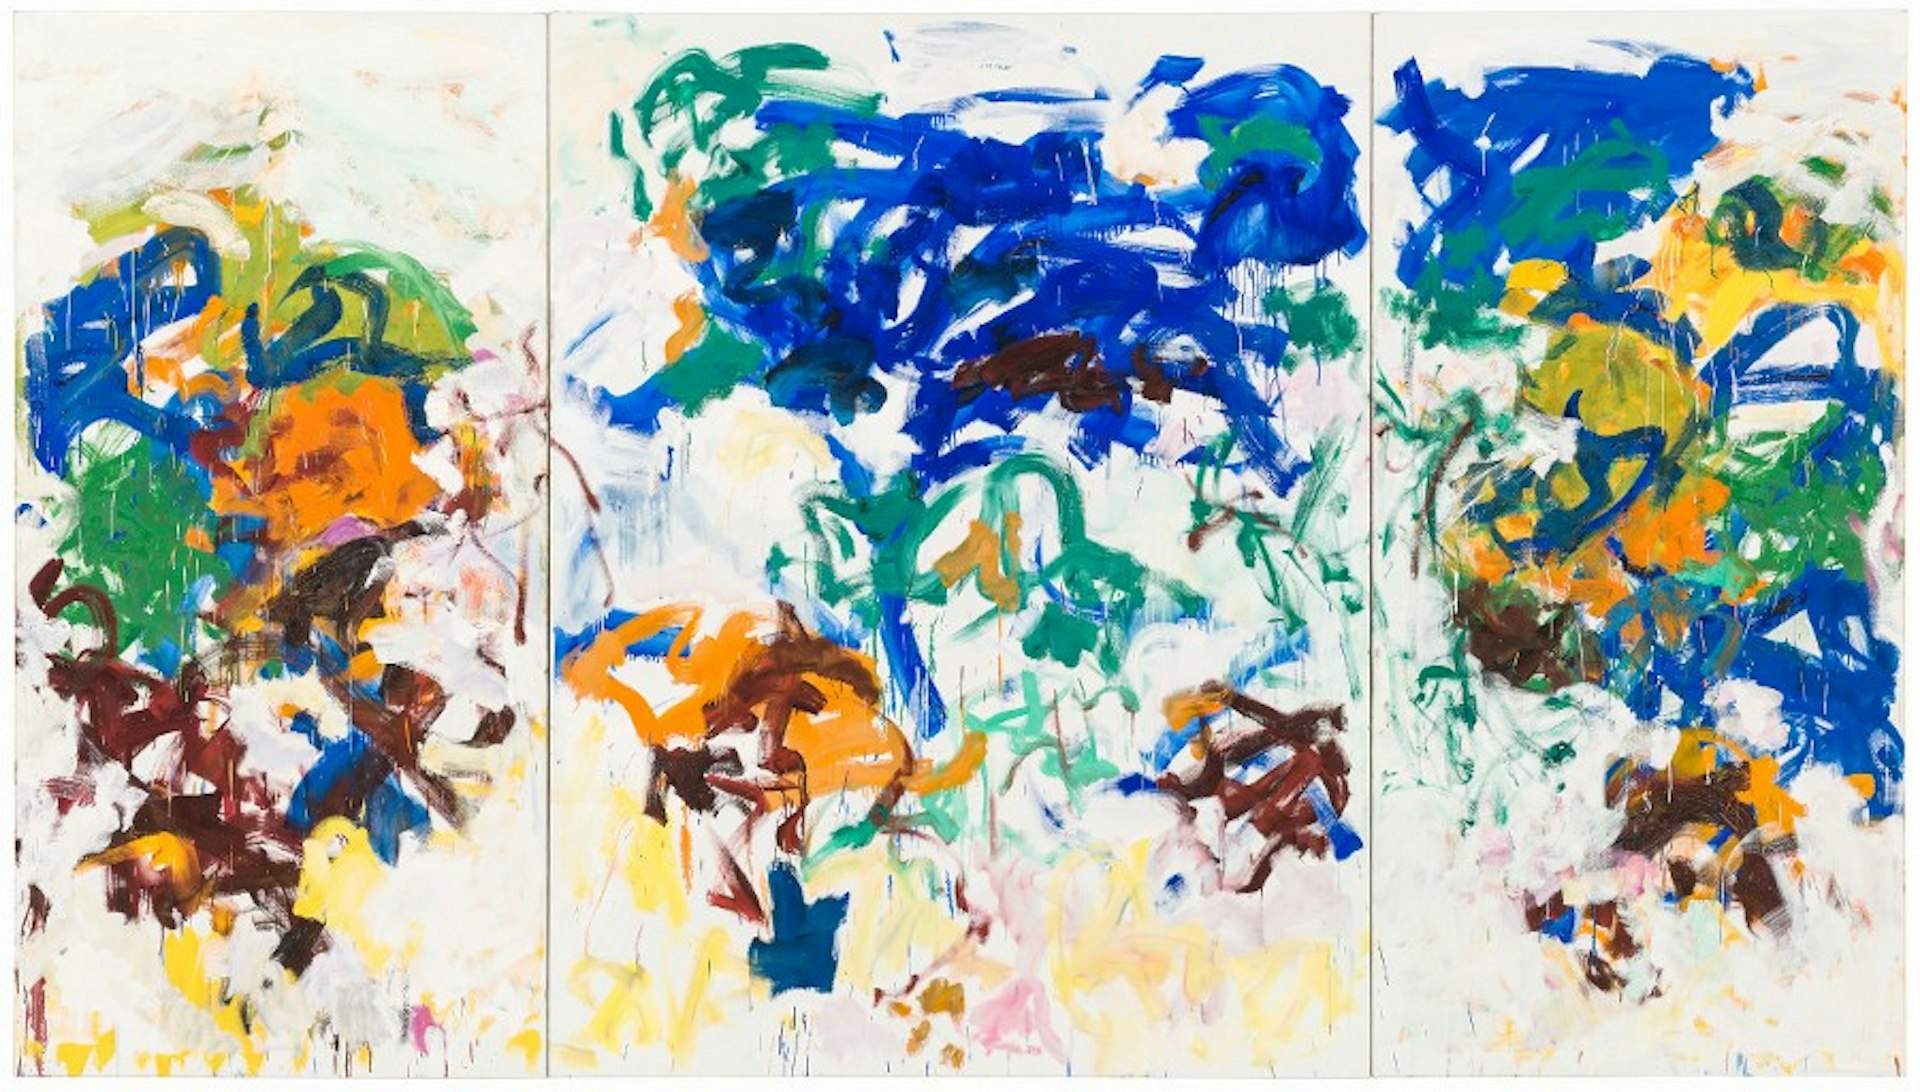 A painting of Bracket 1989 by Joan Mitchell